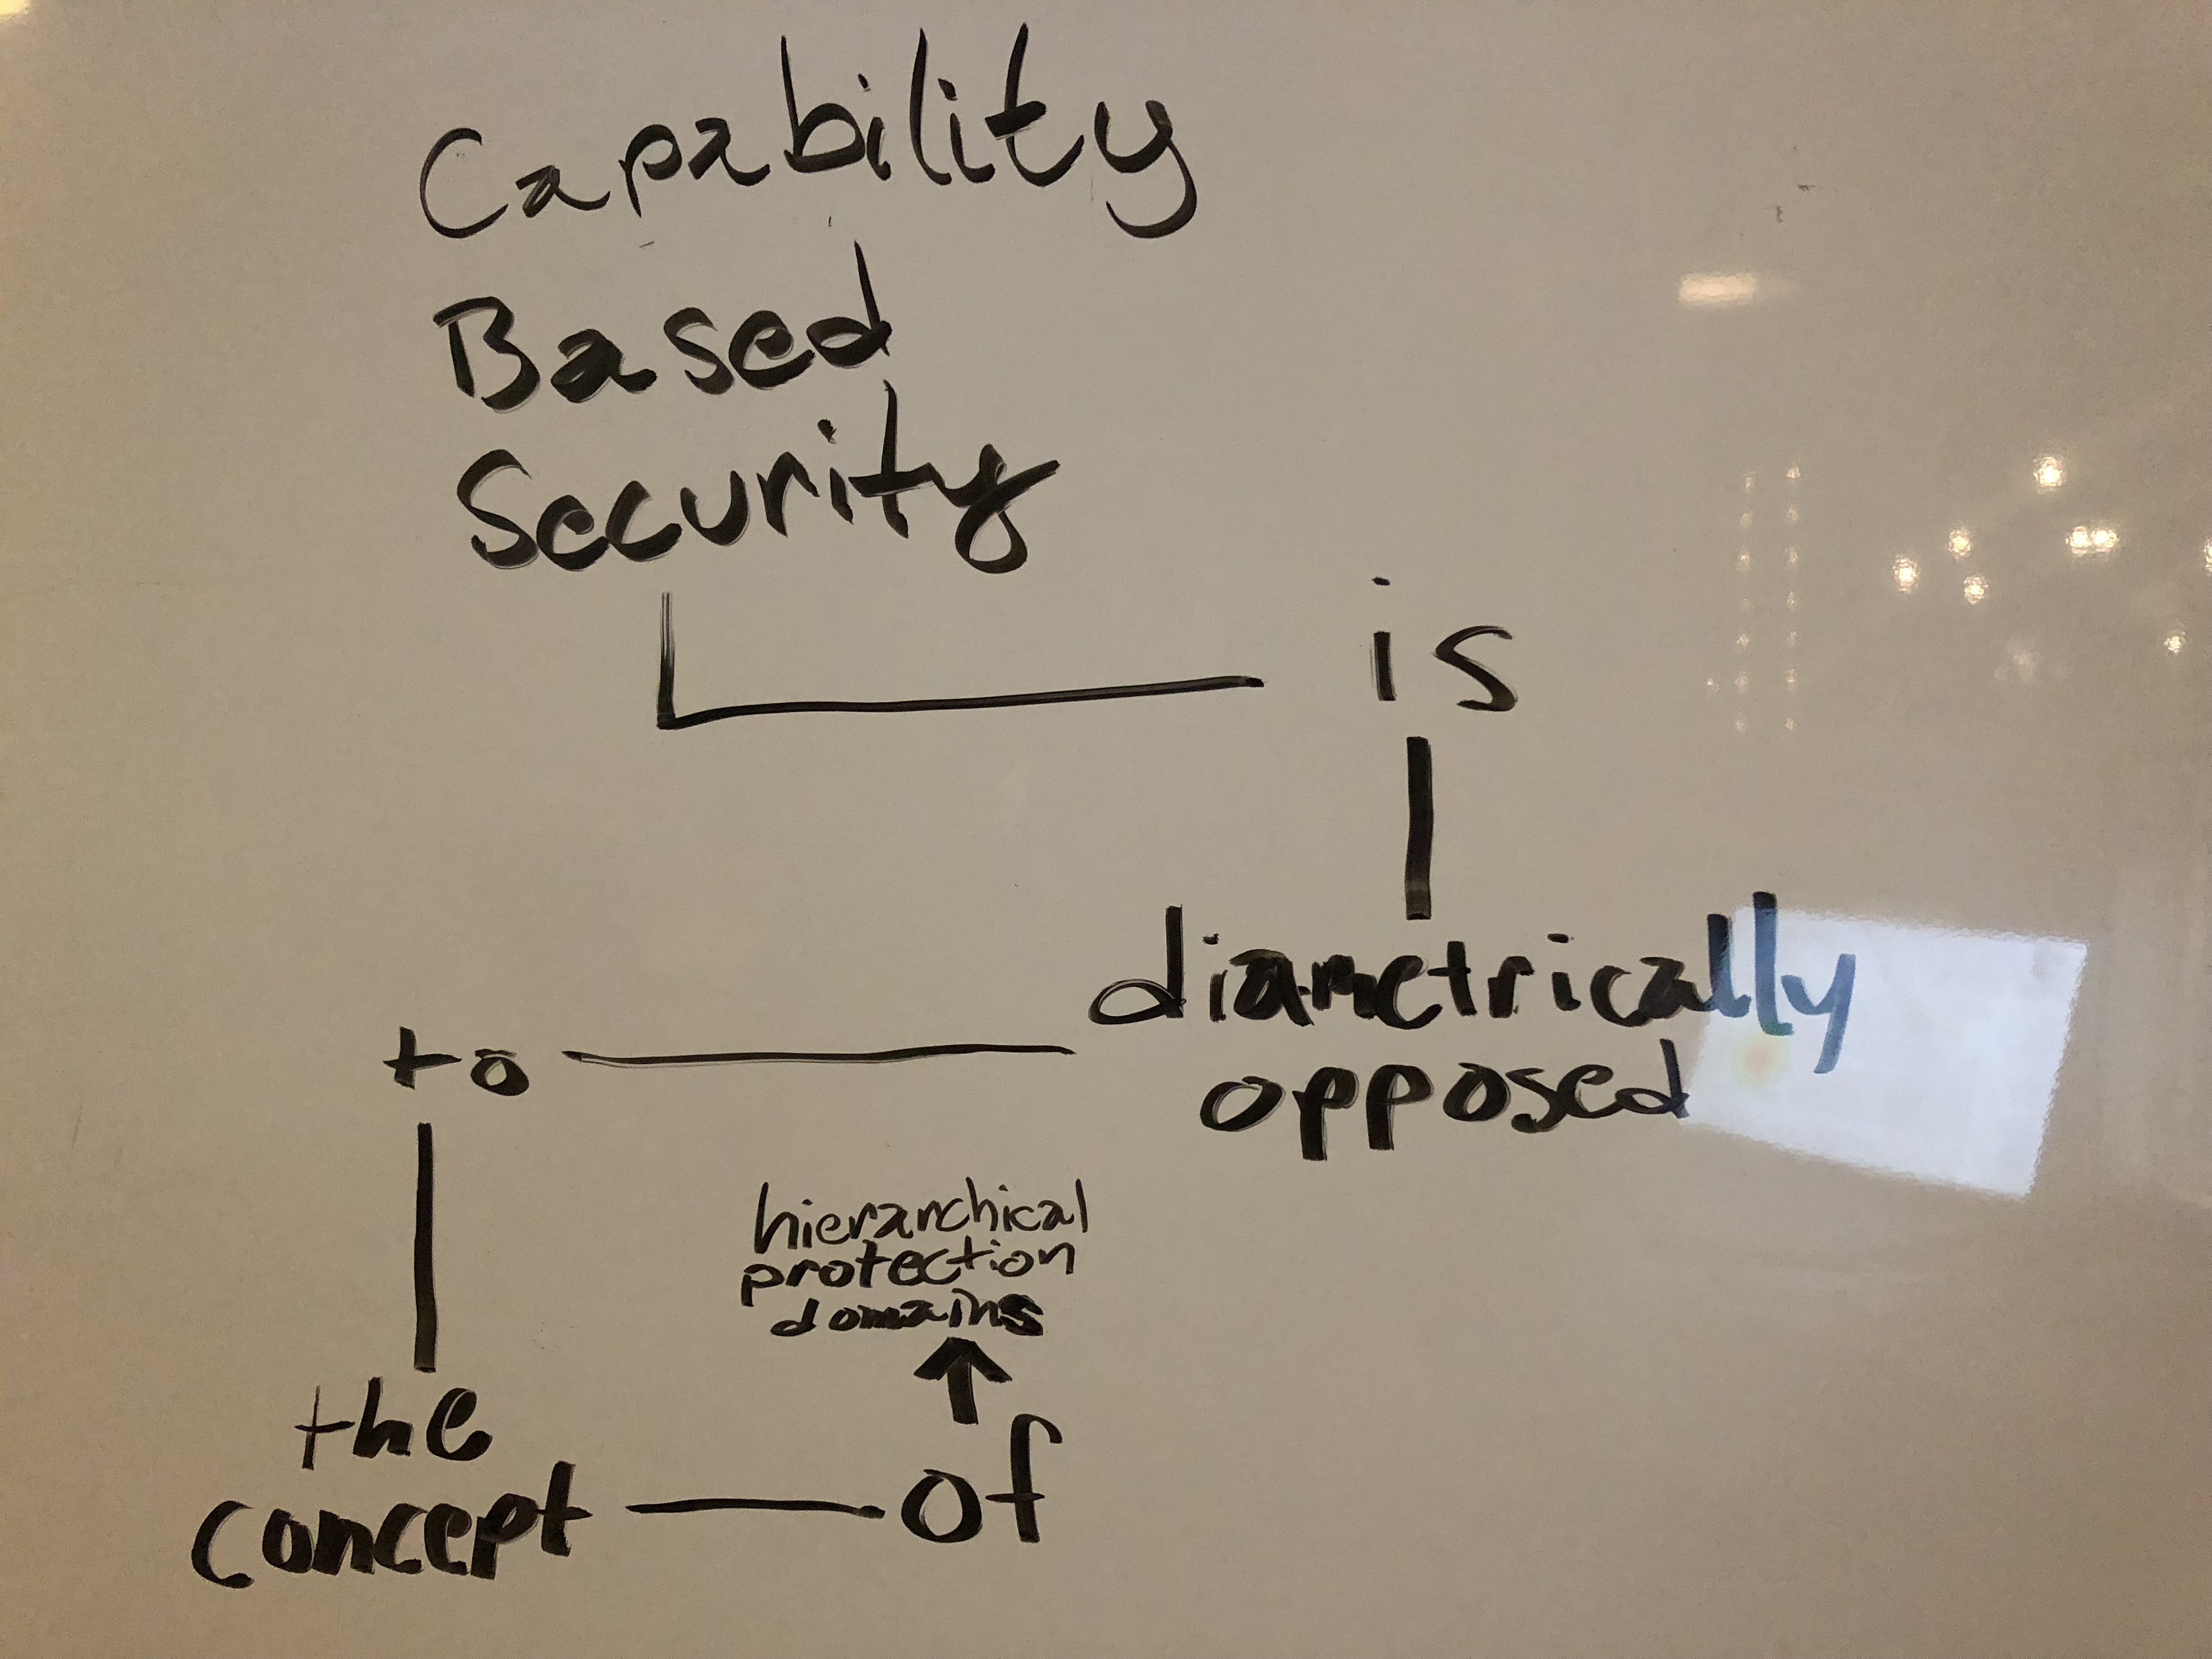 capability-based security vs hierarchical protection rings